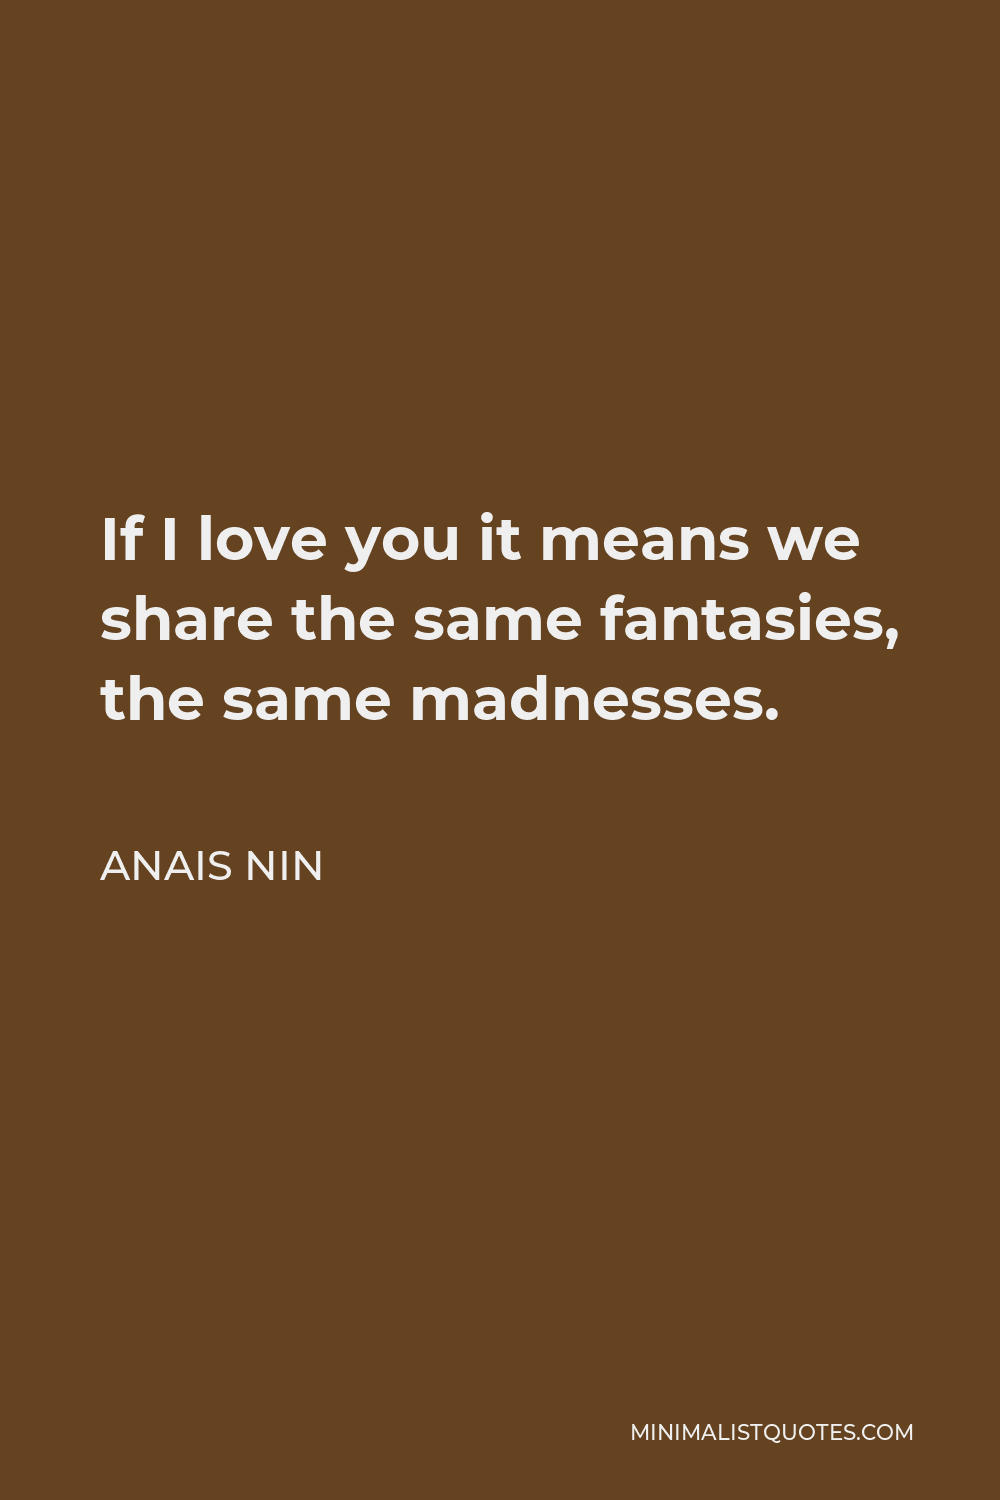 Anais Nin Quote - If I love you it means we share the same fantasies, the same madnesses.